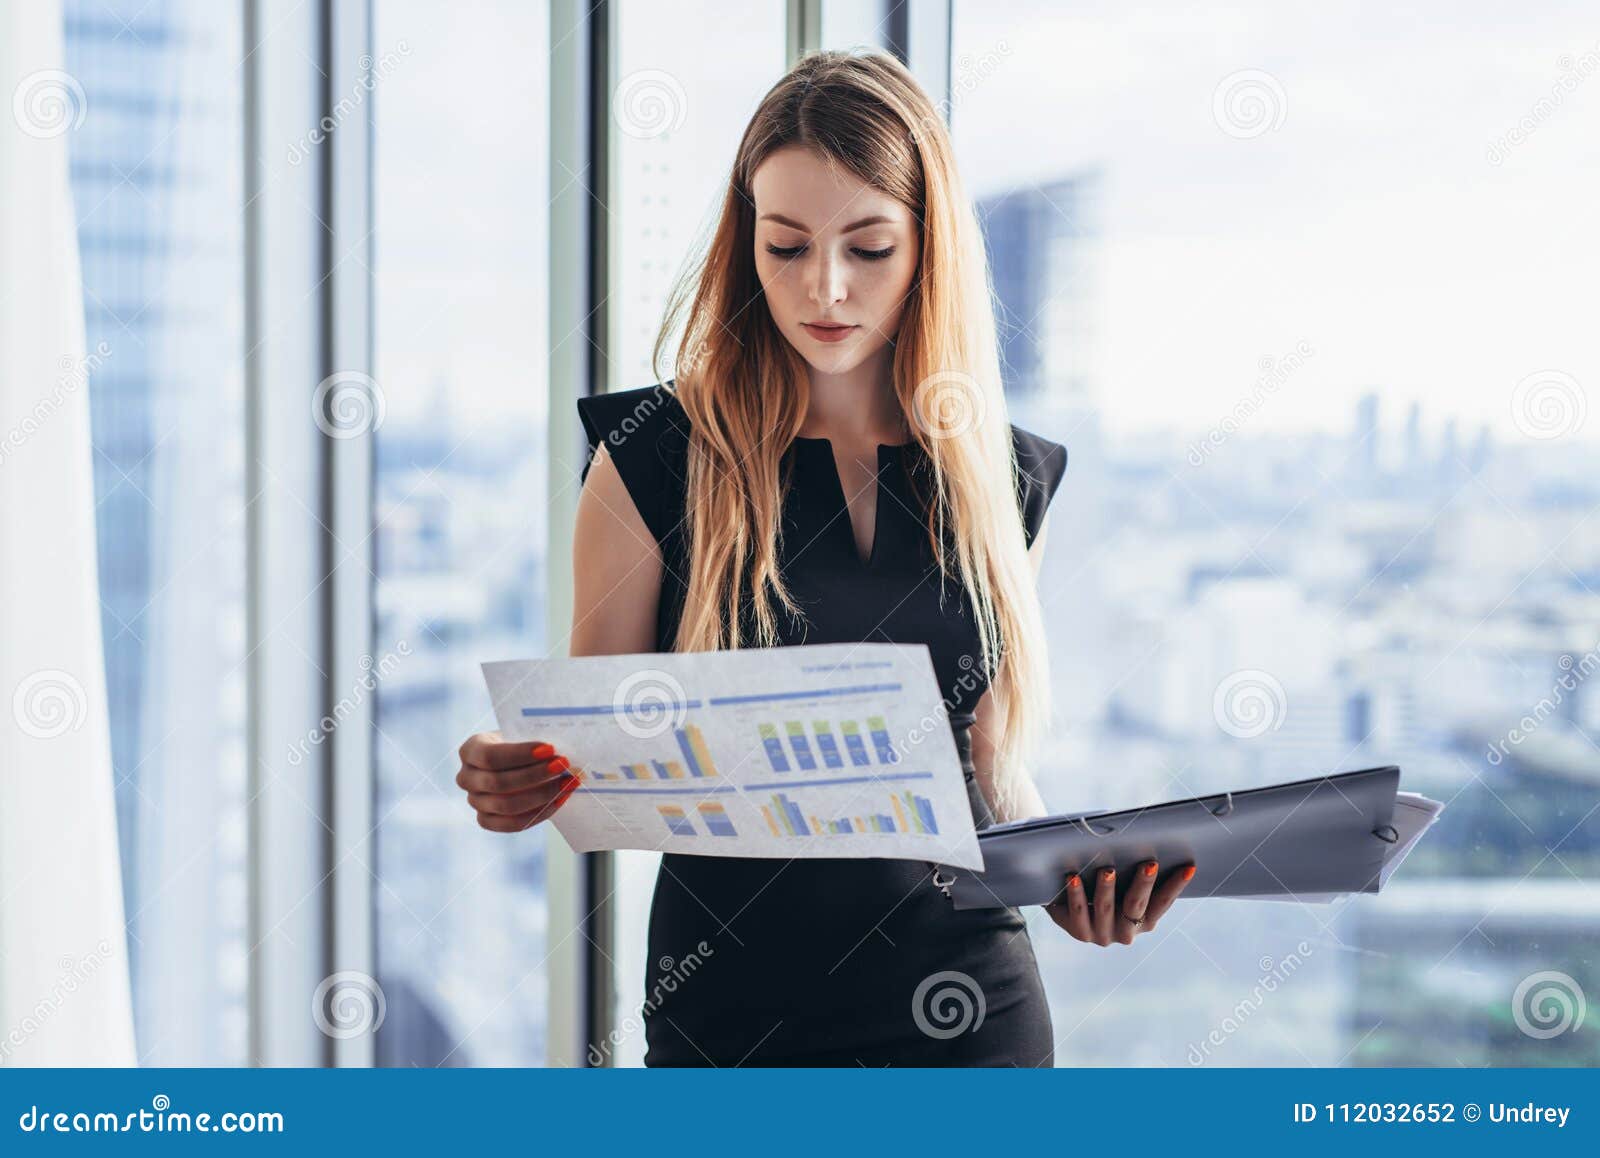 female financial analyst holding papers studying documents standing against window with city view